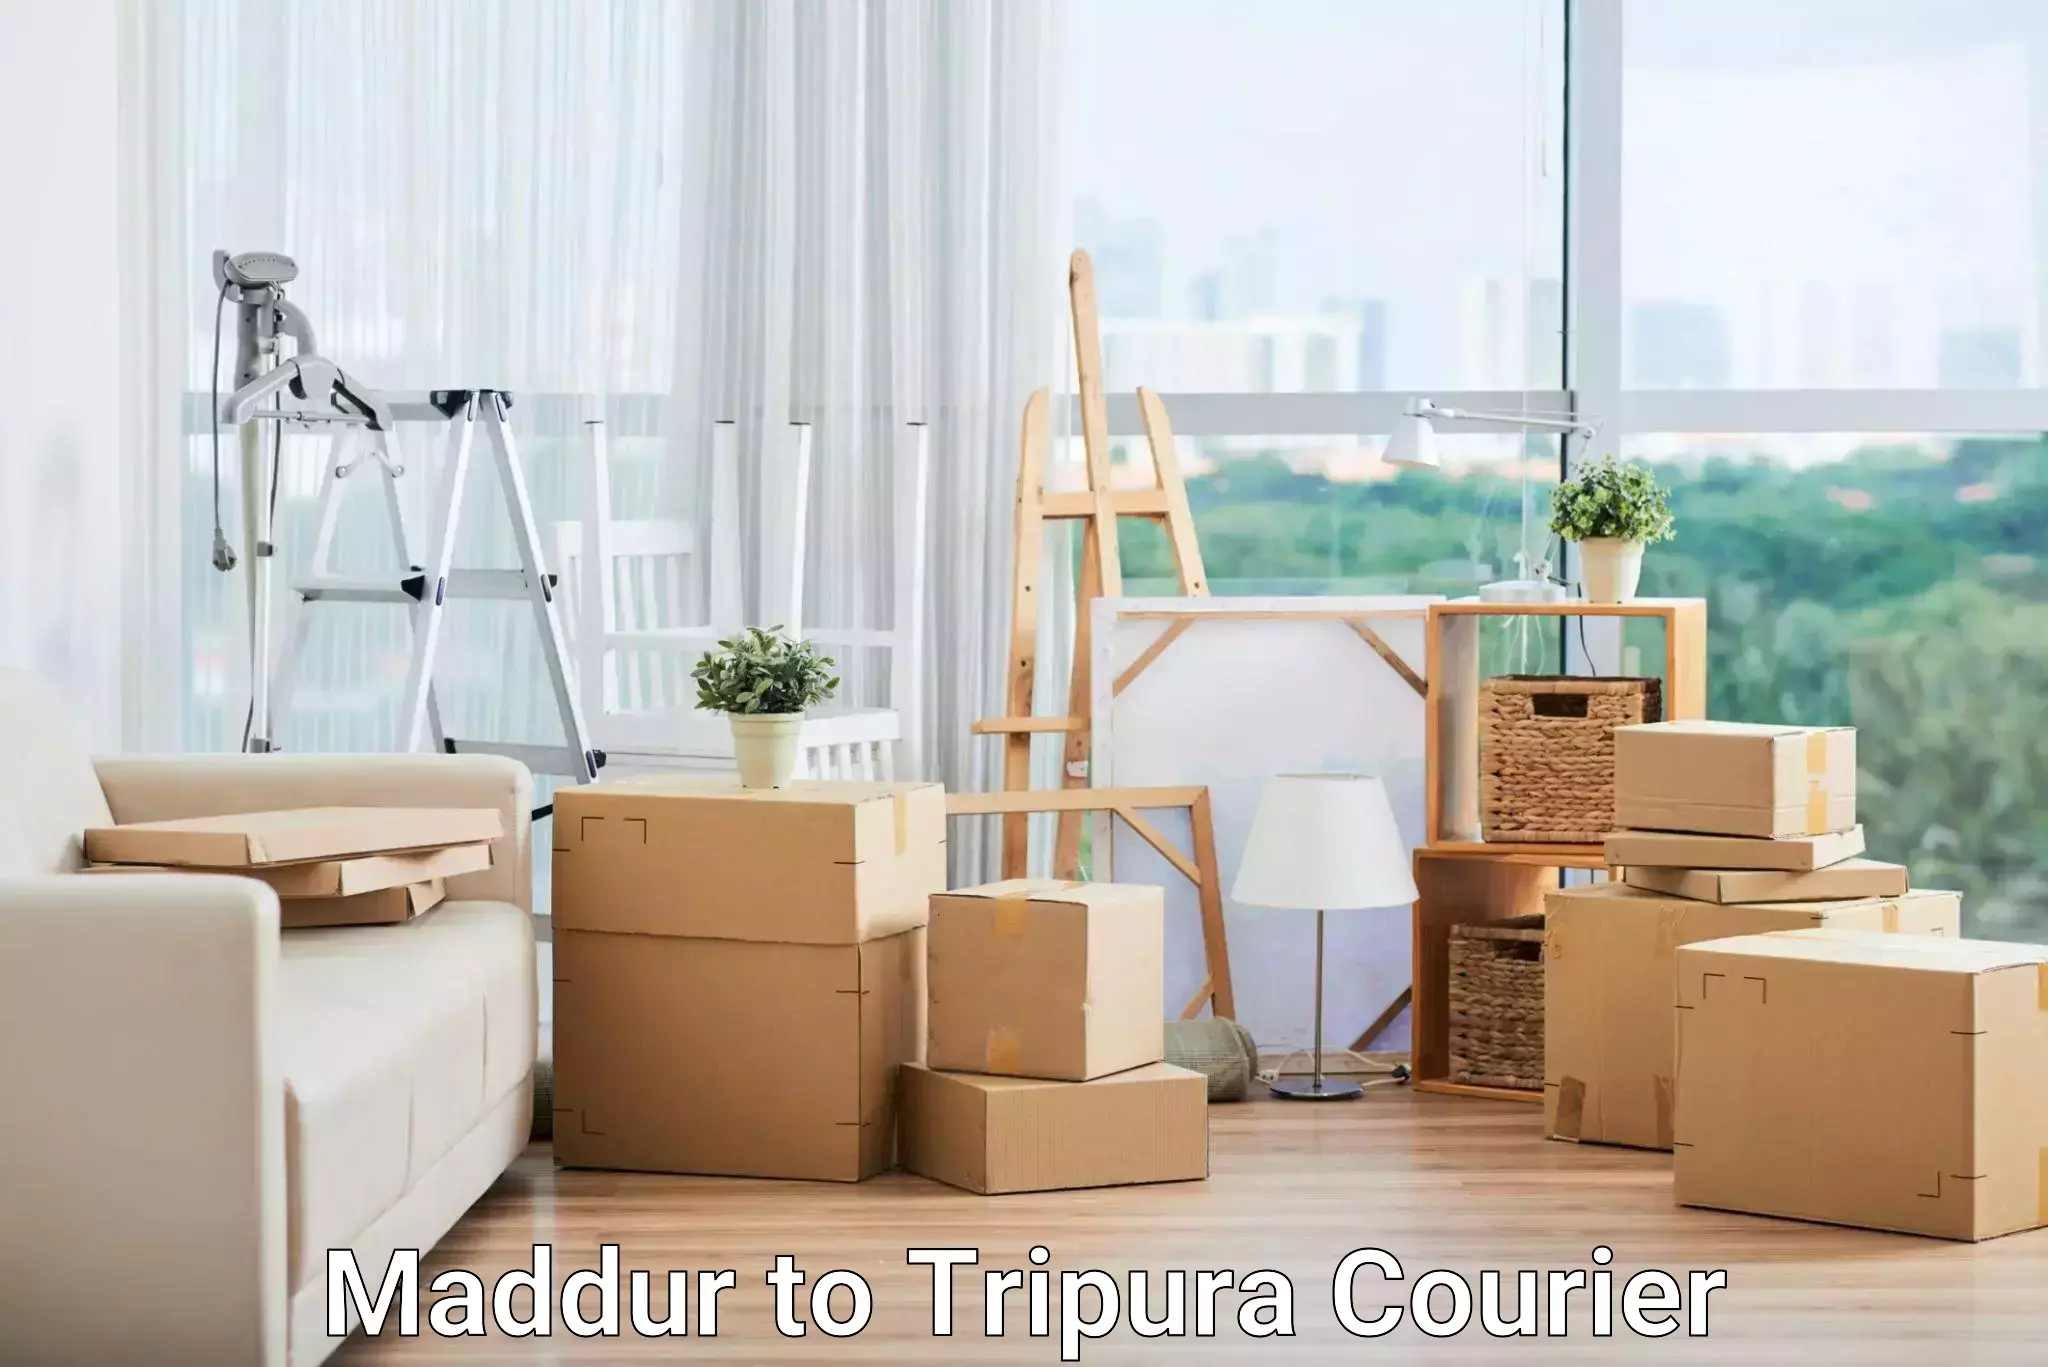 Personal parcel delivery Maddur to Udaipur Tripura